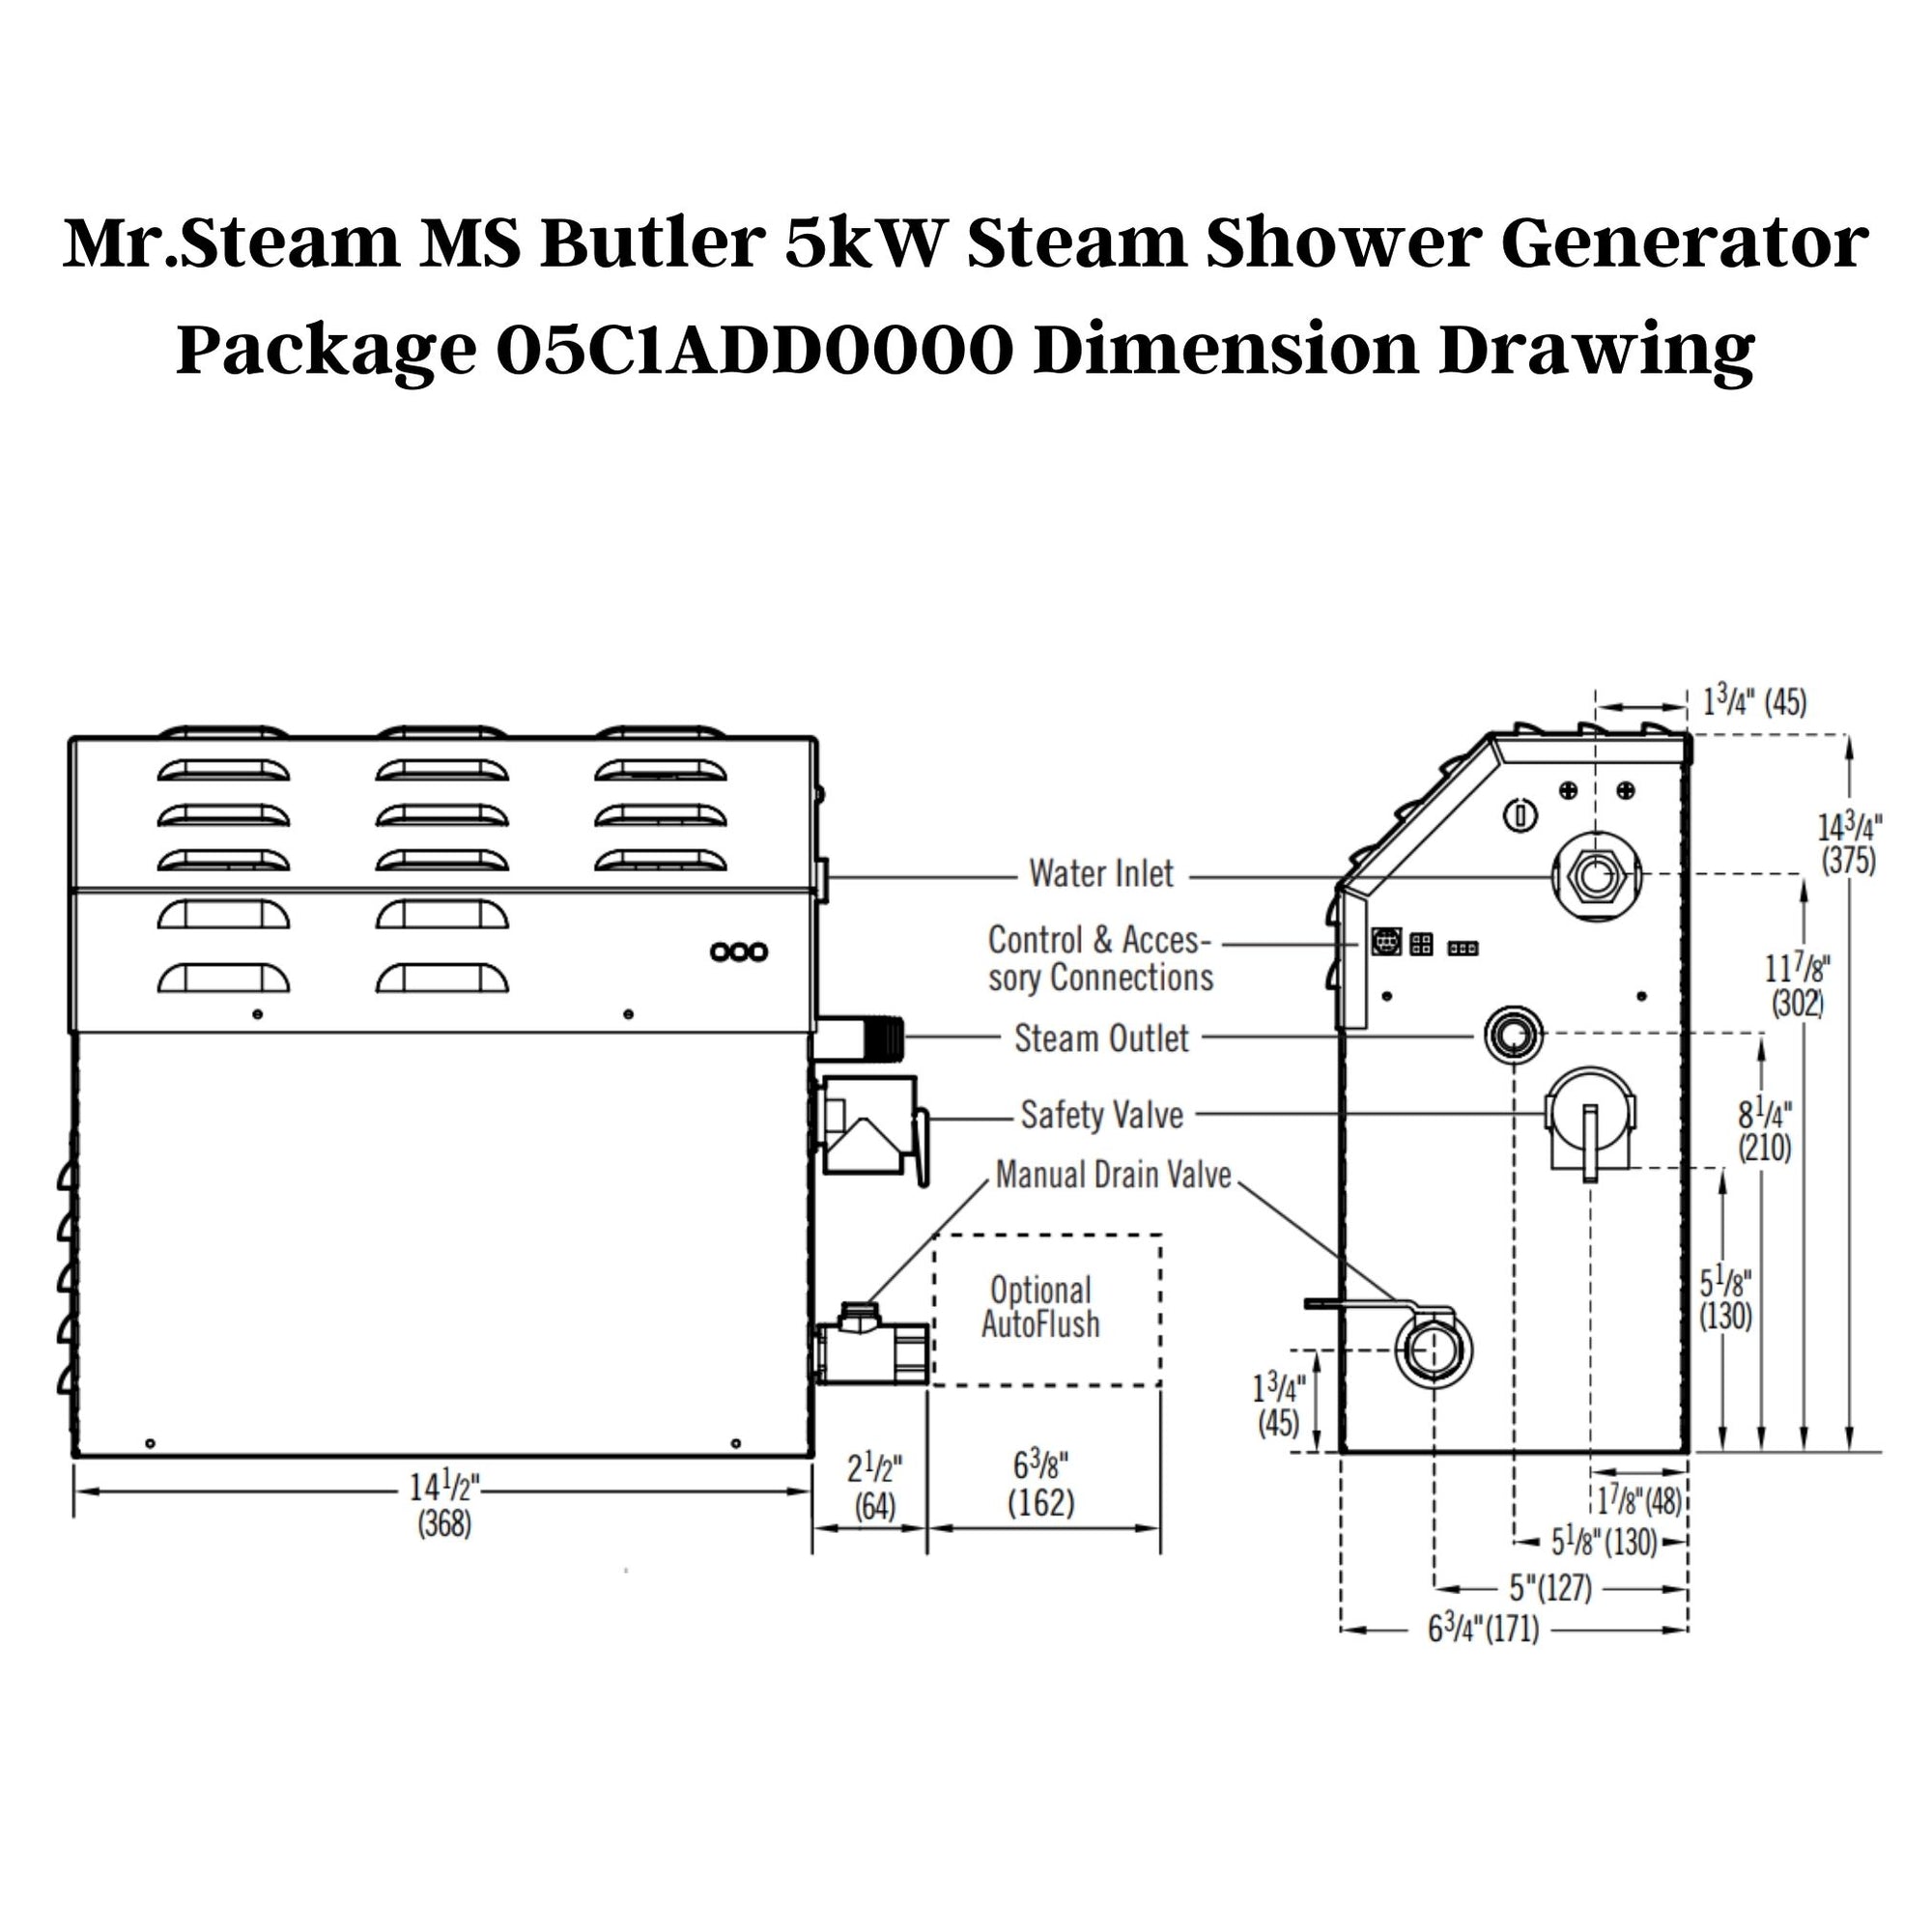 Mr. Steam 5kW MS (Butler) Steam Shower Generator Package with iTempoPlus Control in Square Oil-Rubbed Bronze 05C1ADD0000